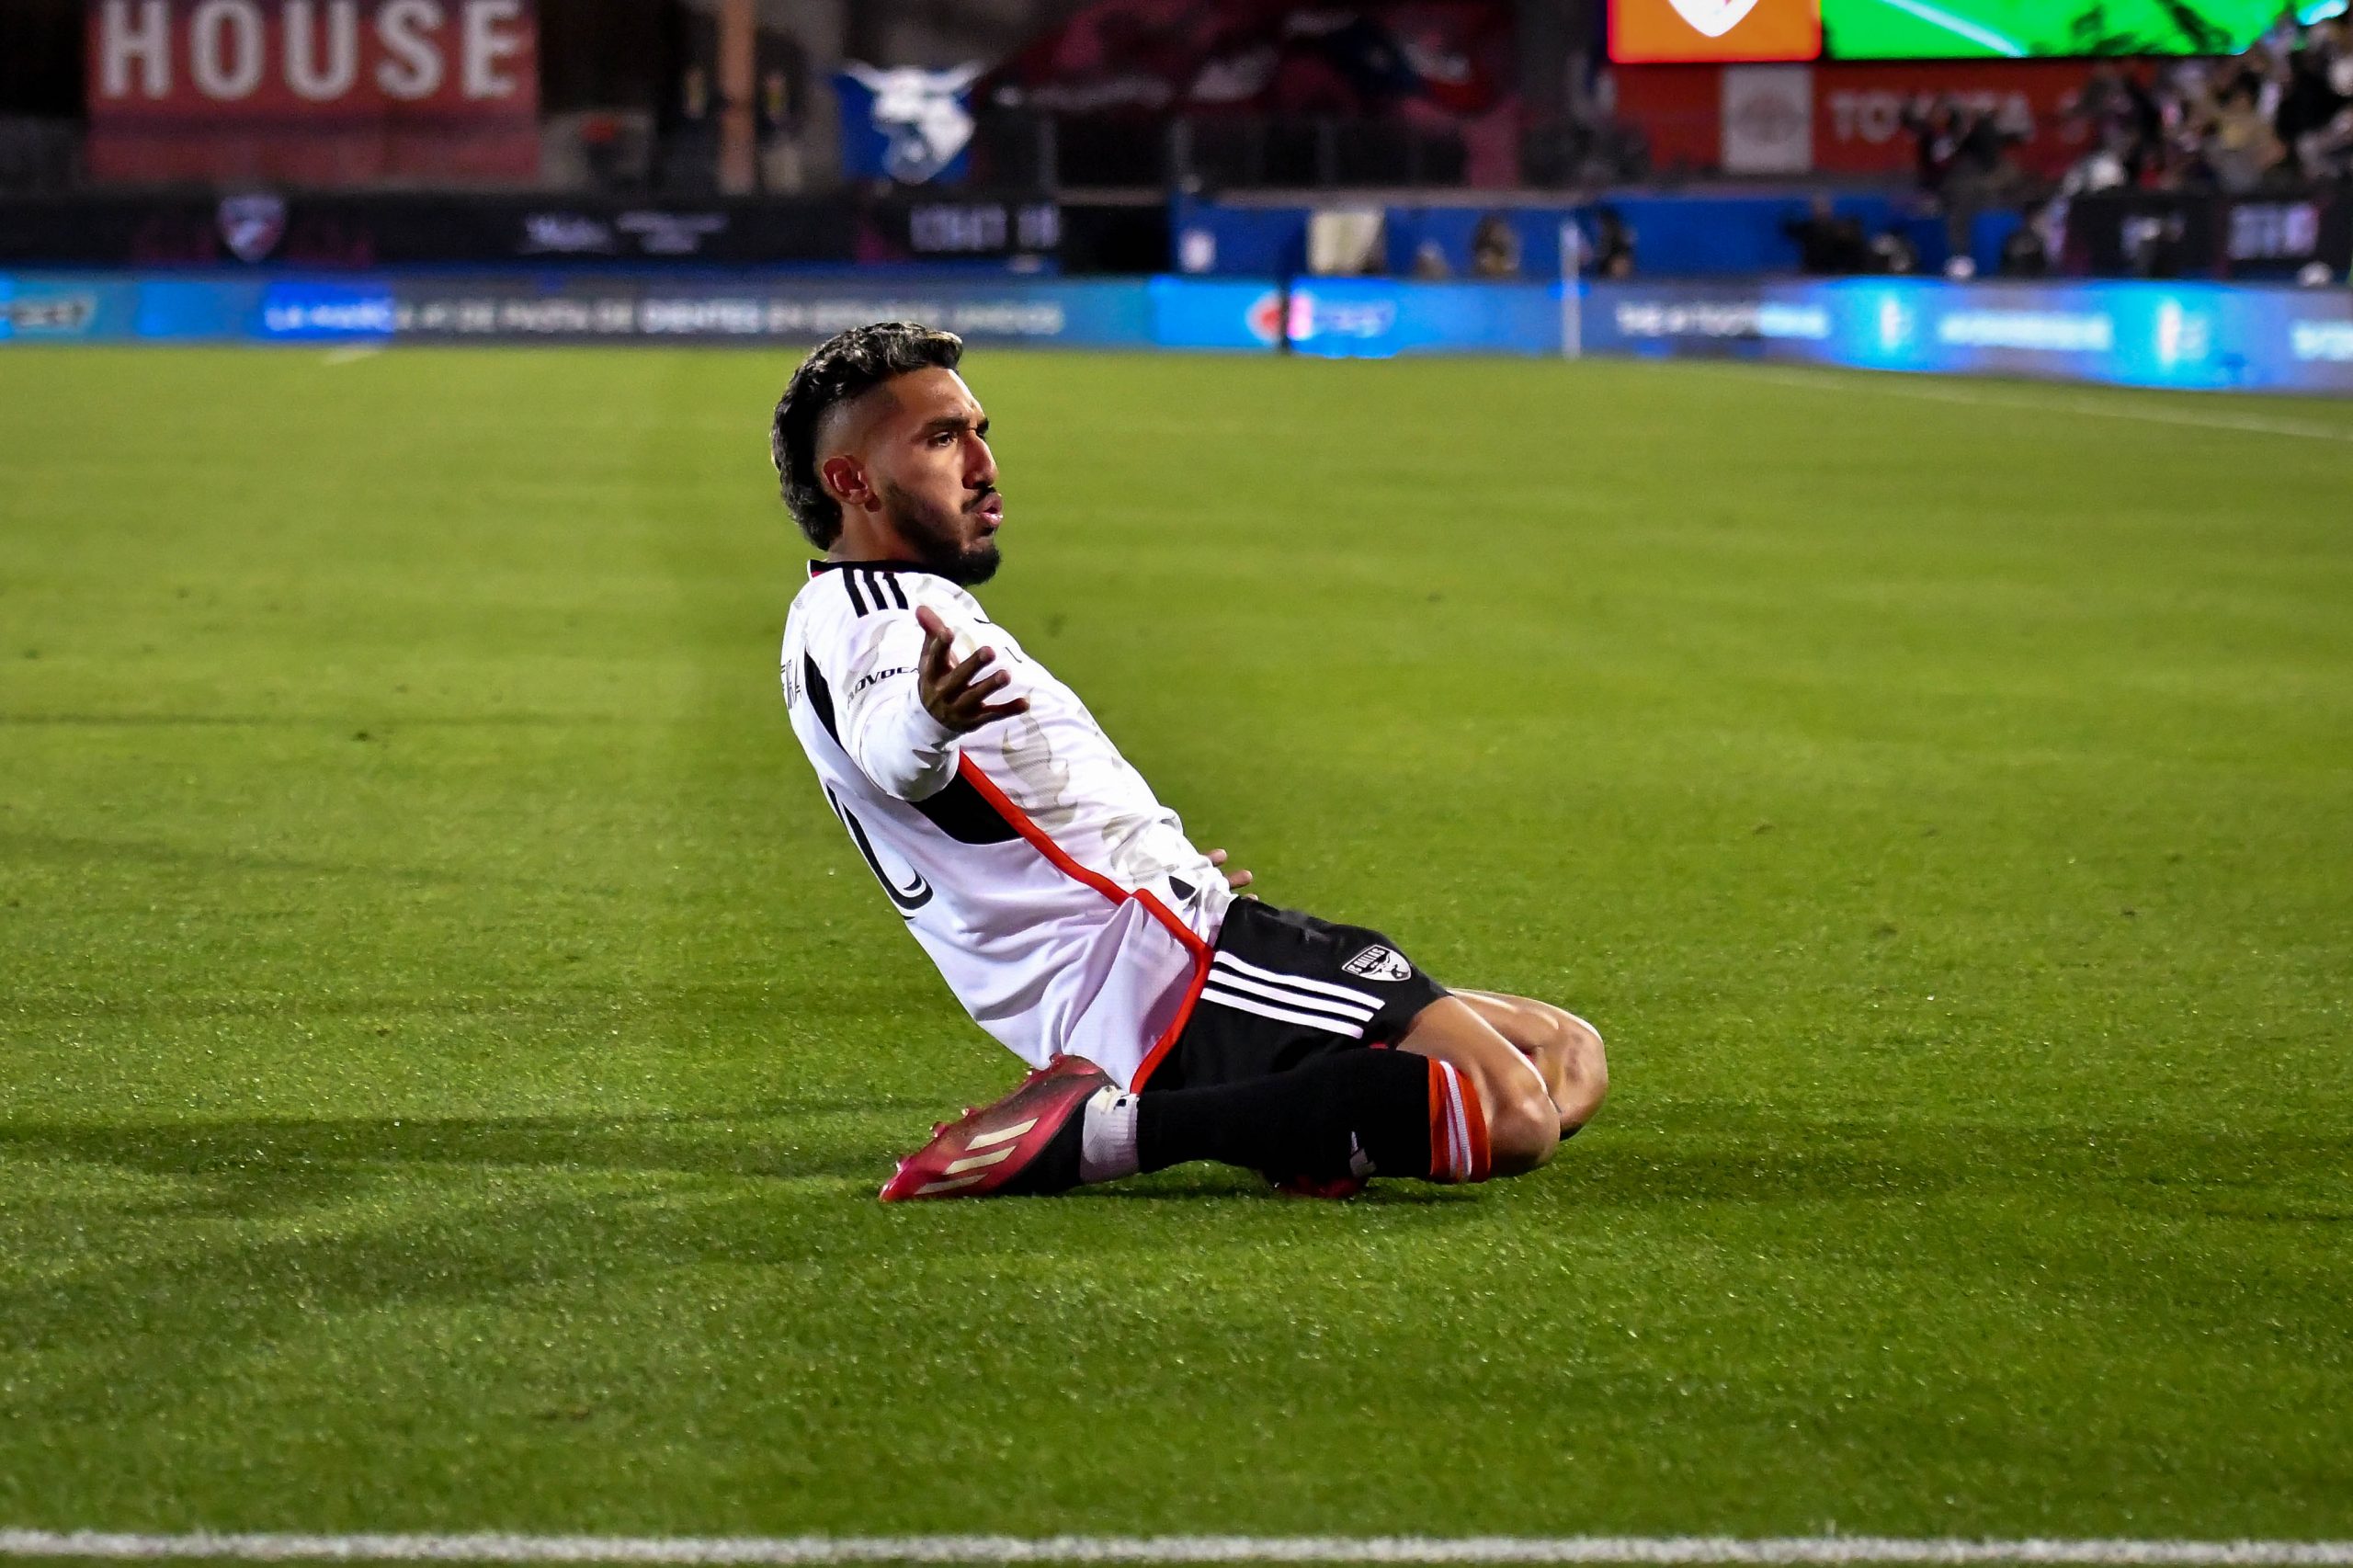 Jesus Ferreira slides toward the crowd after scoring the winning goal in the MLS match against Sporting KC on Saturday, March 18, 2023, at Toyota Stadium. (Daniel McCullough, 3rd Degree)